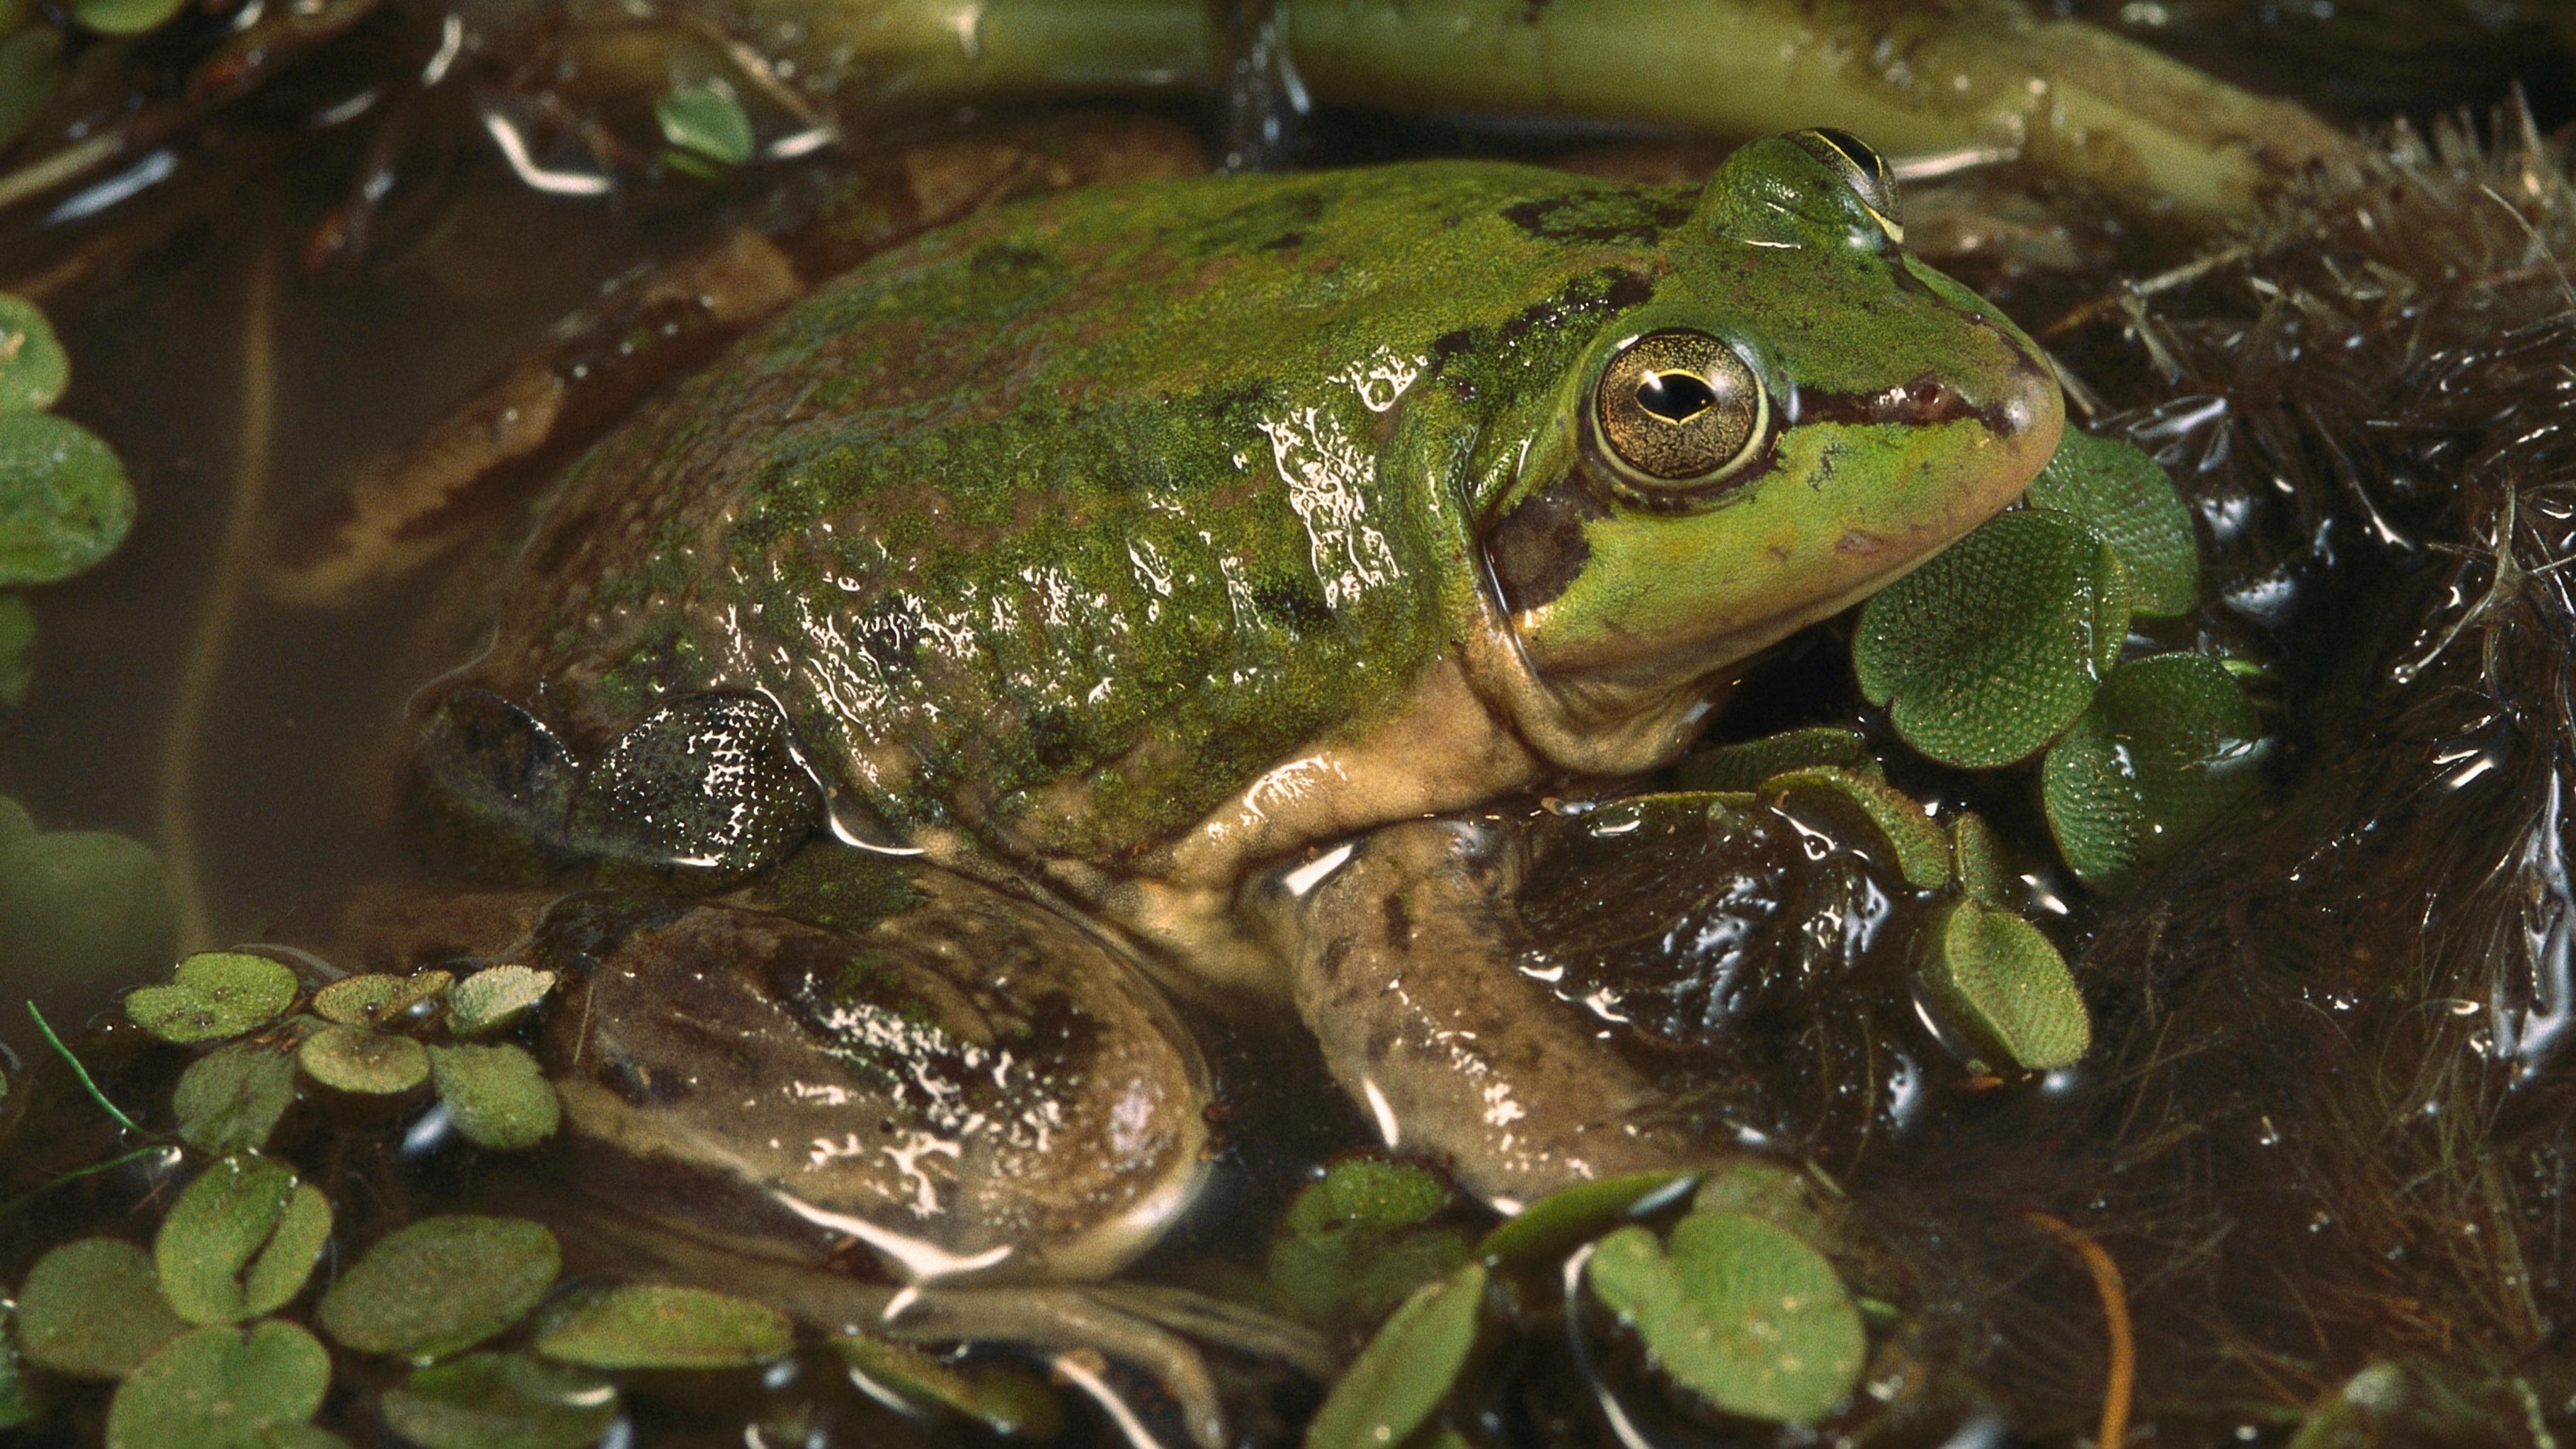 Paradoxical frog: The giant tadpole that turns into a little frog